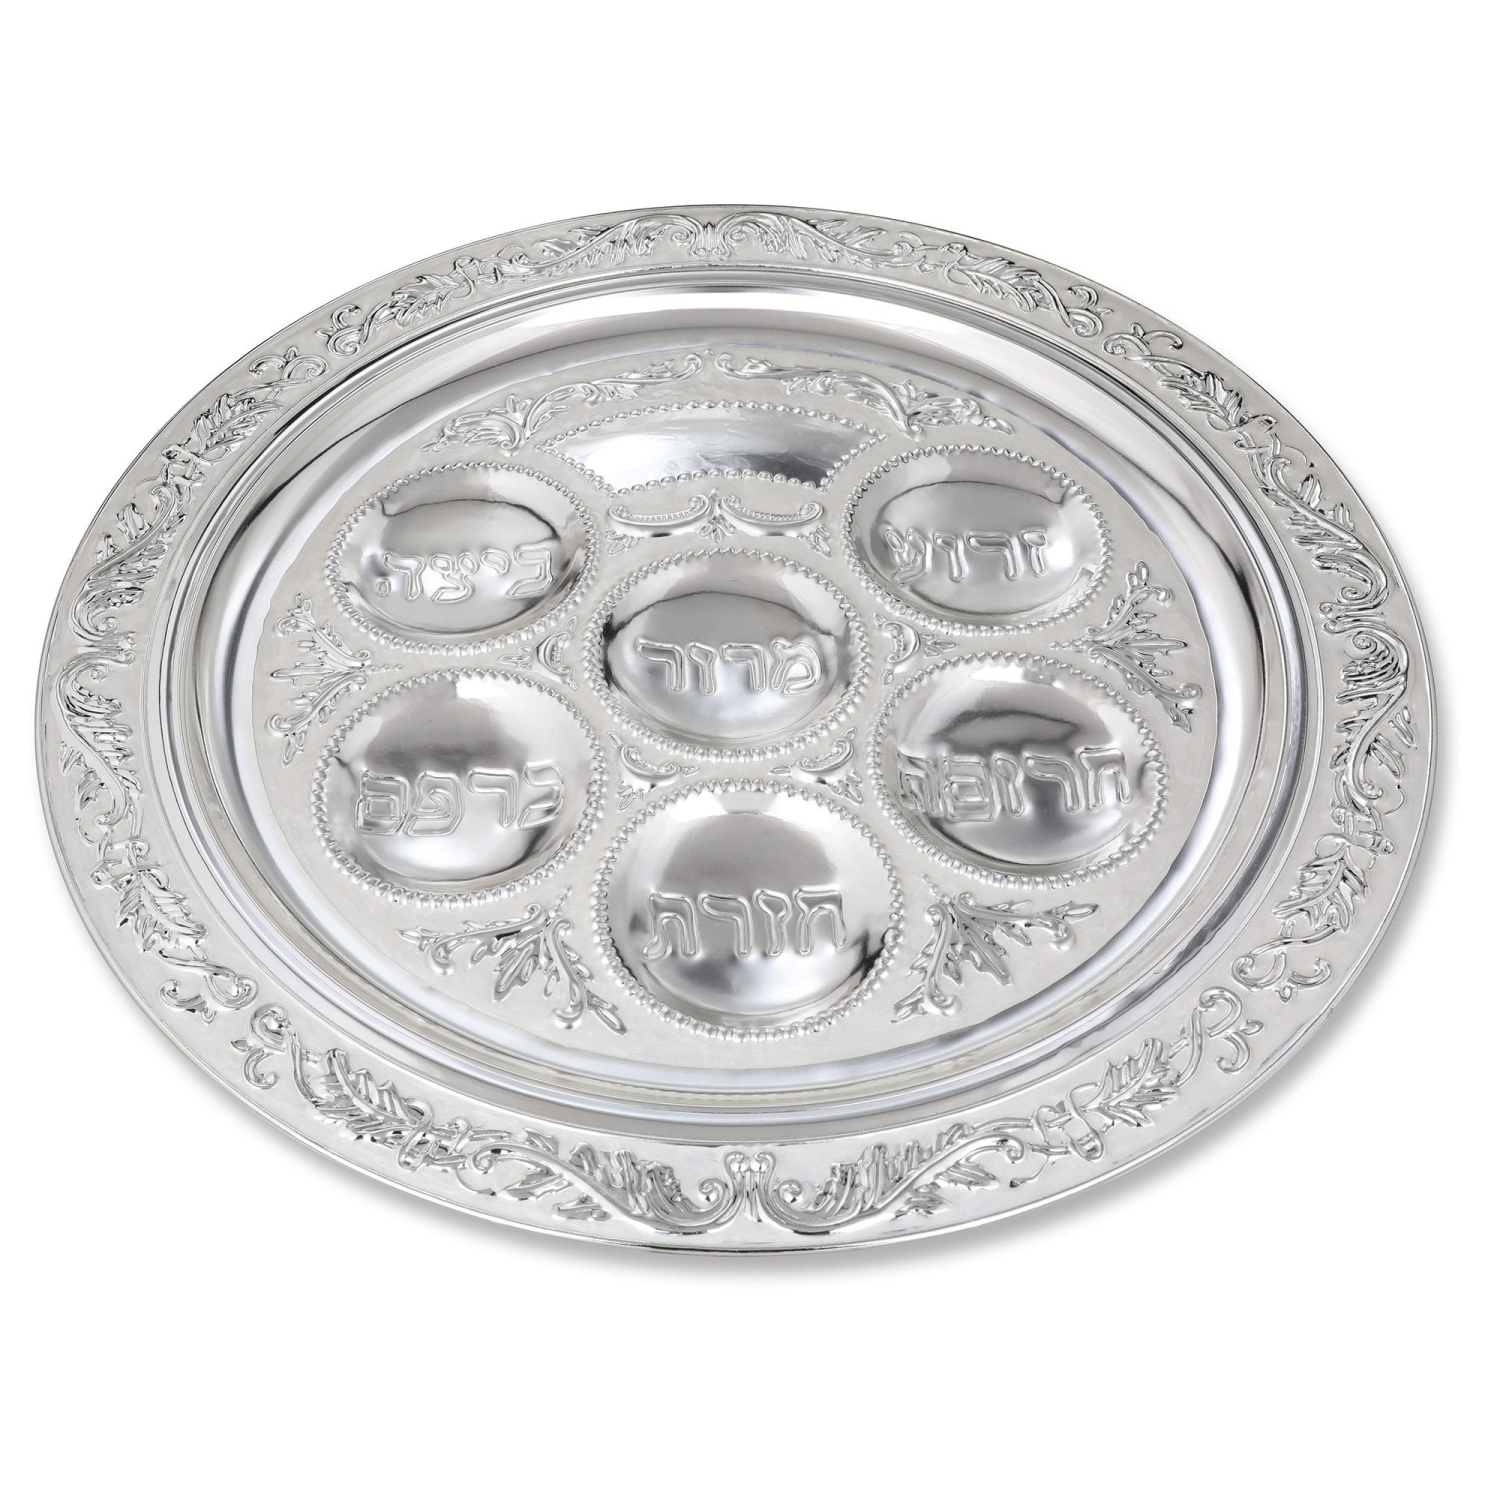 Silver Plated Seder Plate with Leafy Design - 2